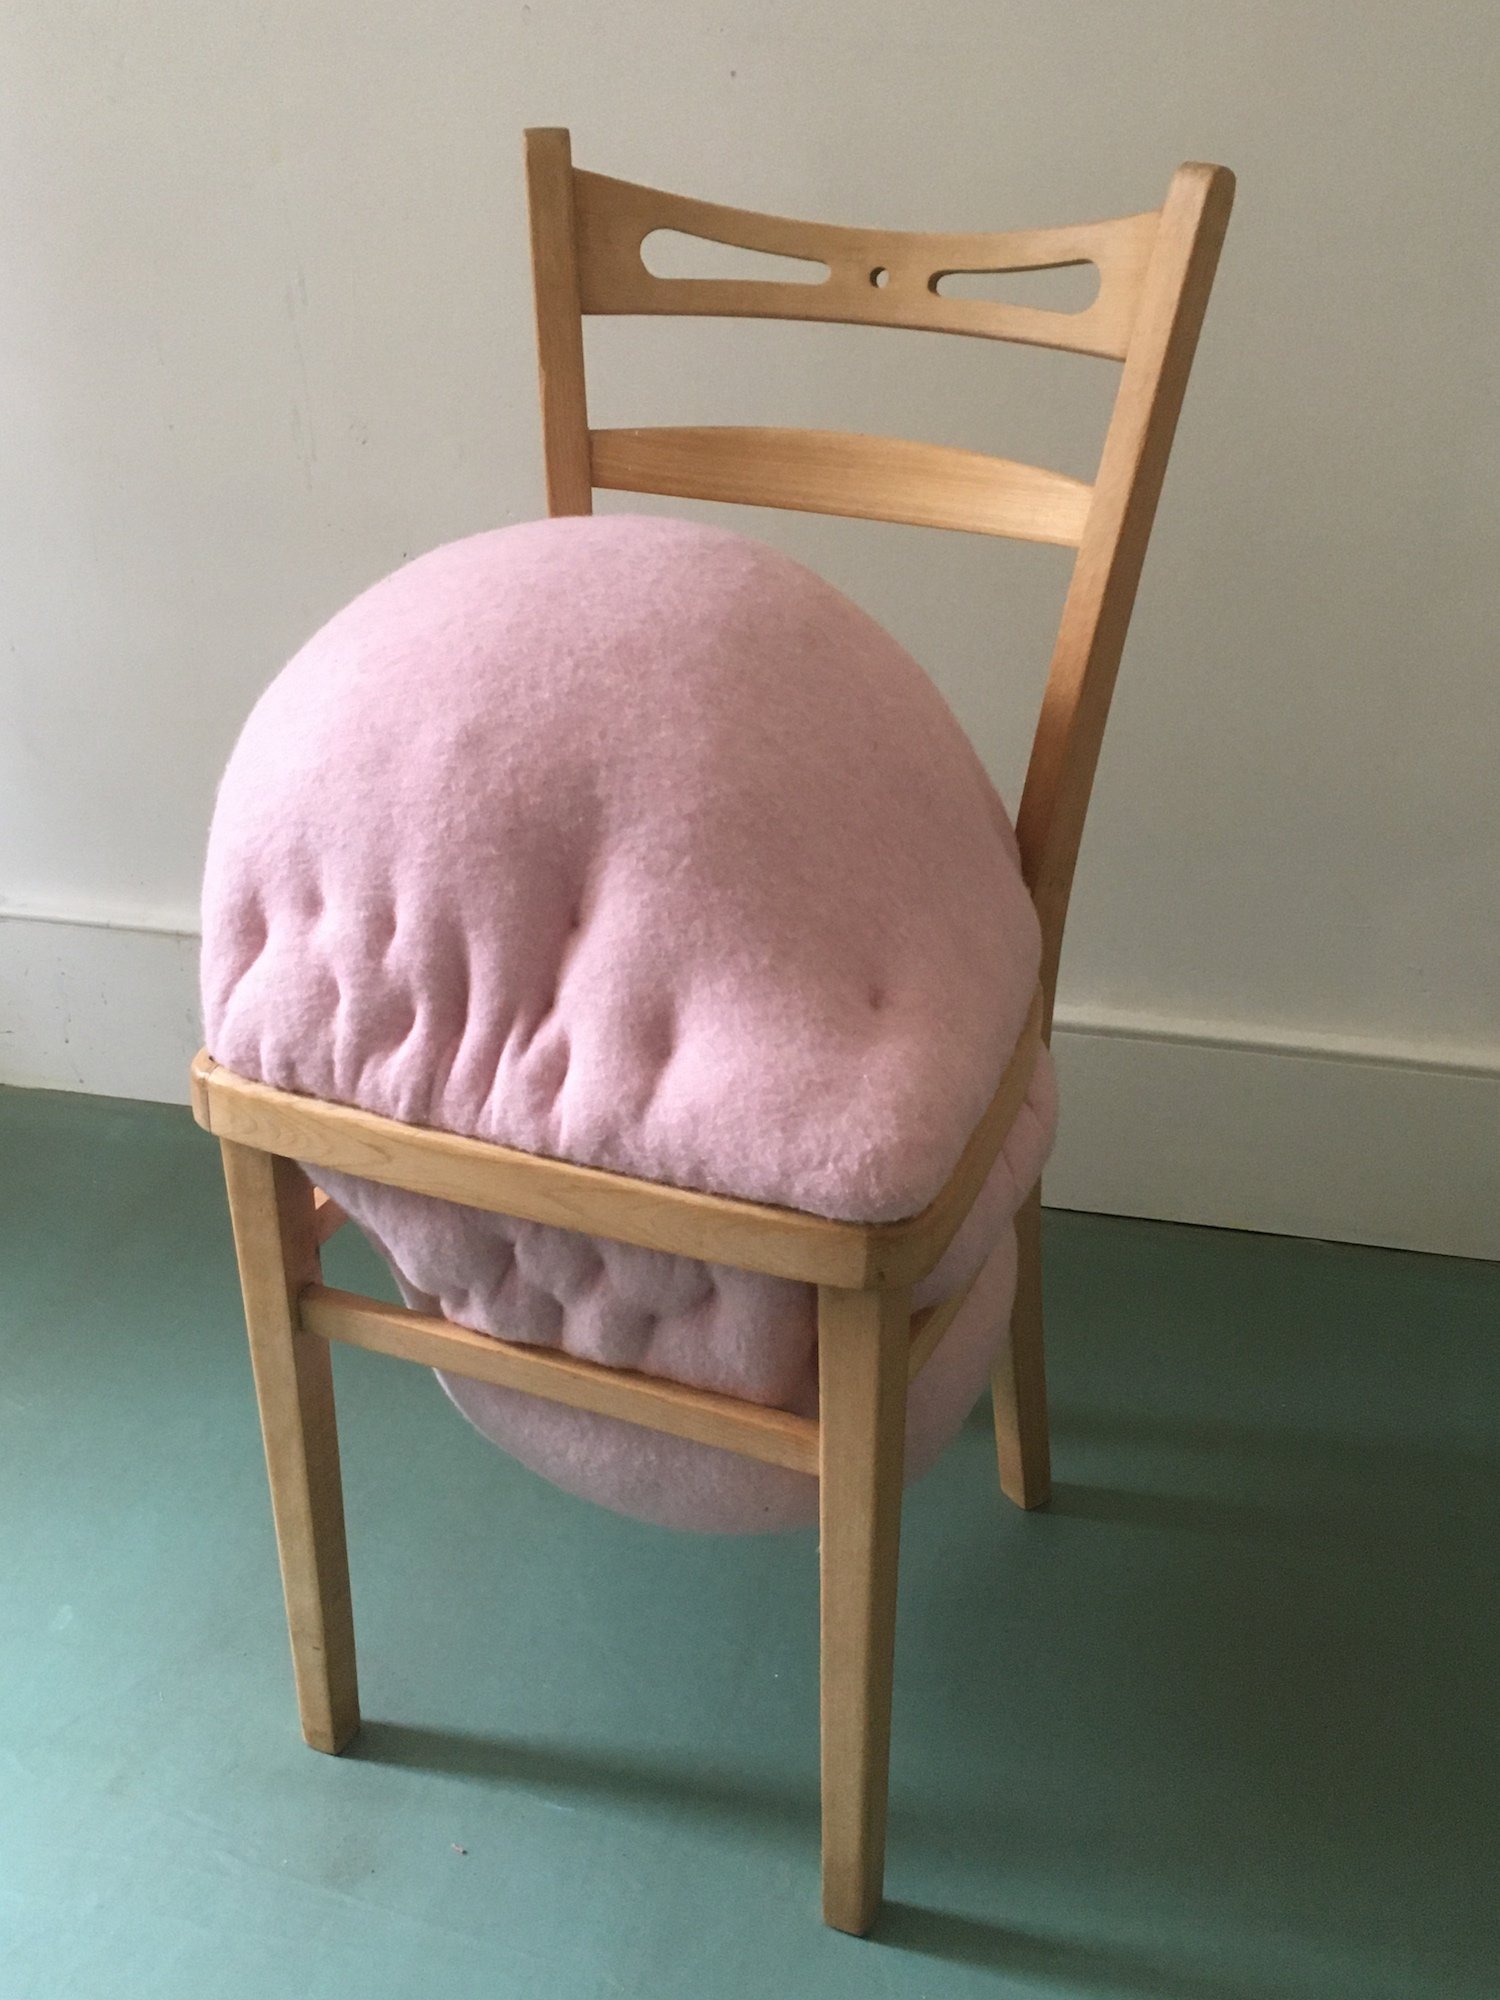     Chimera 2,  2020  found kitchen chair, boiled wool, recycled fibrefill, coconut coir and hessian 